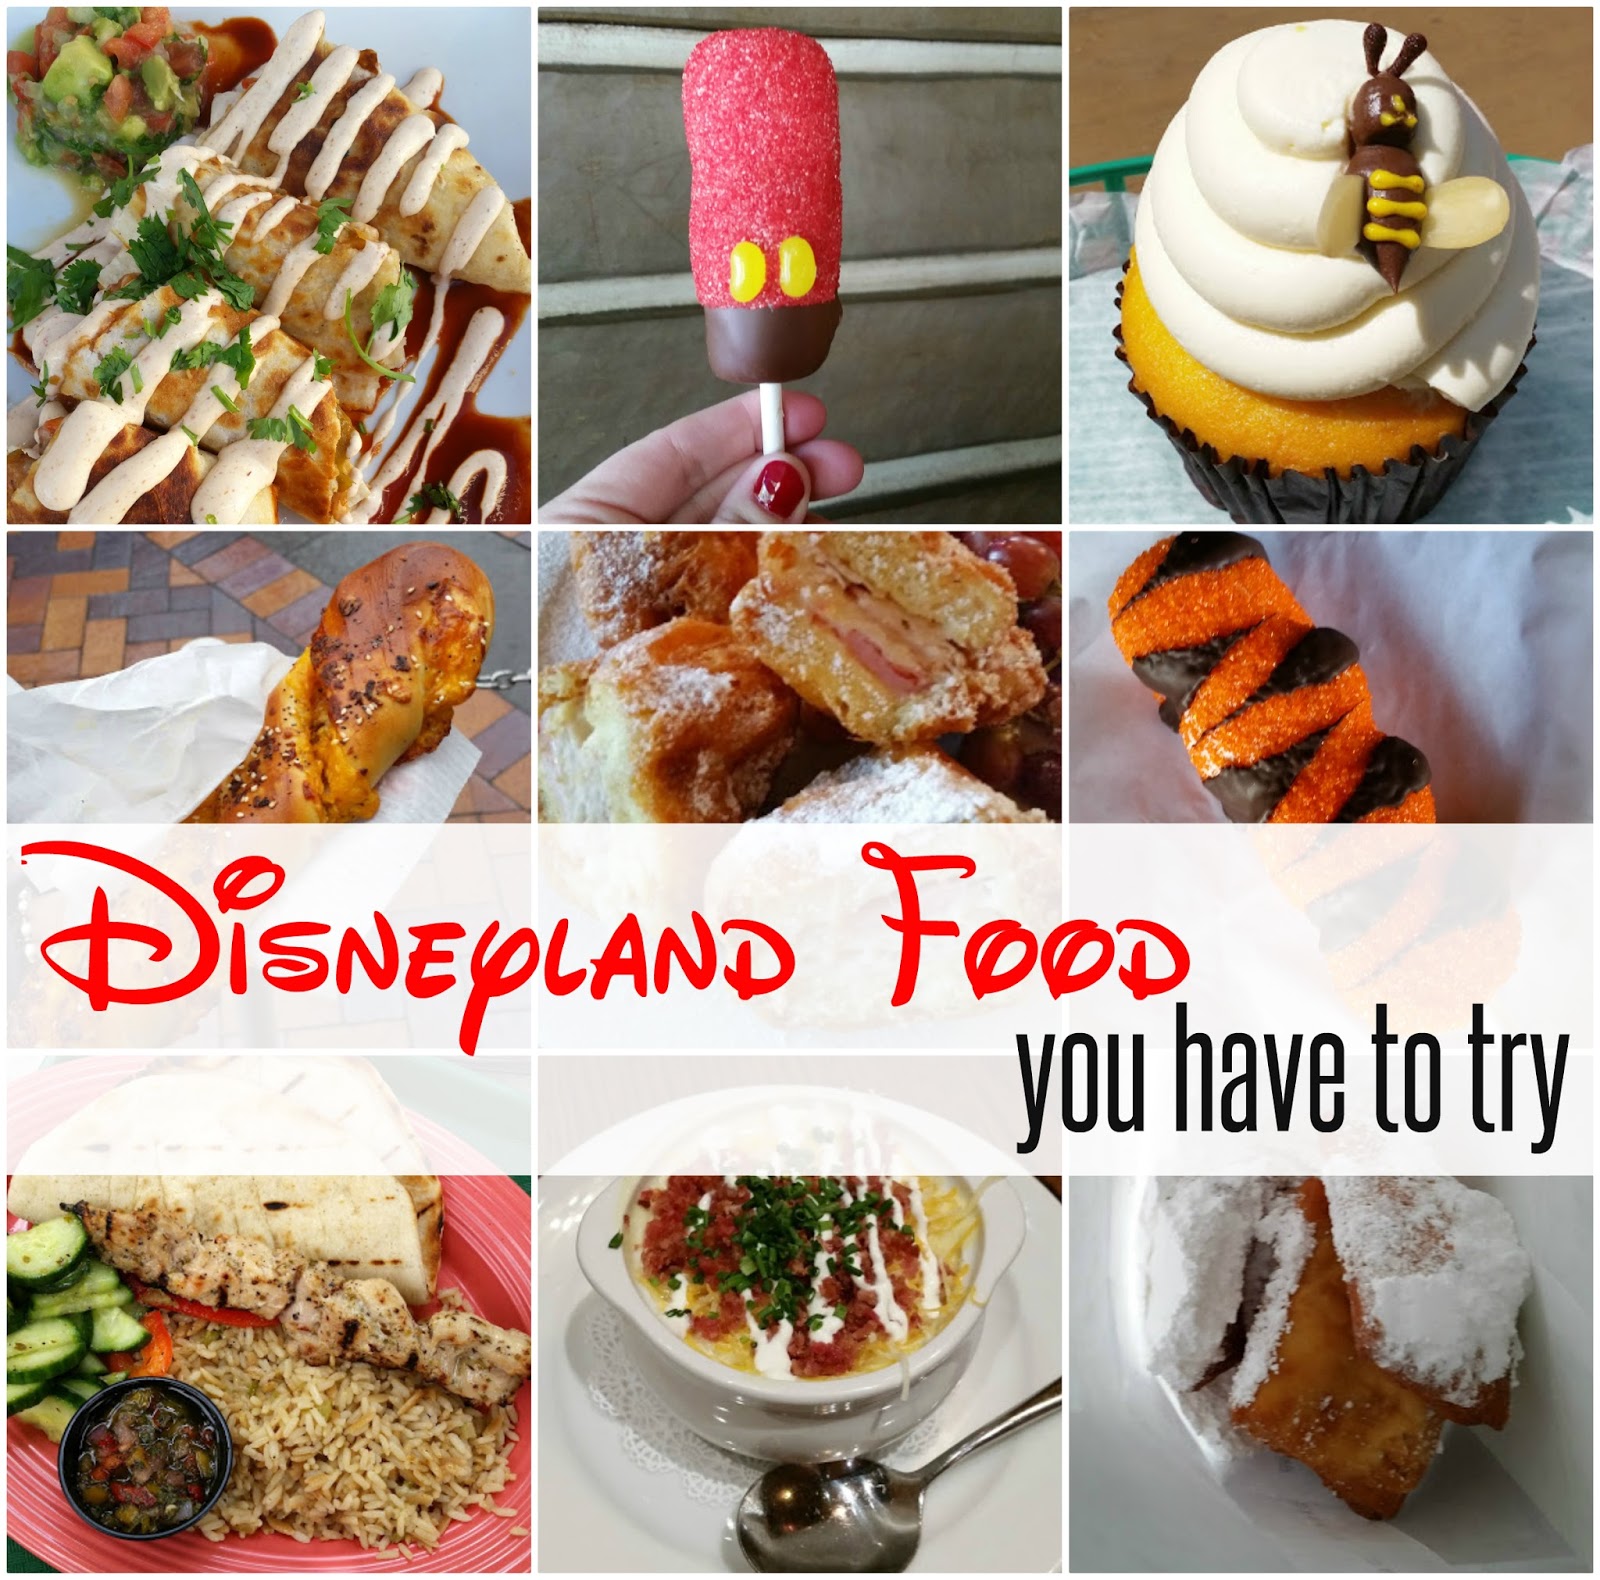 Whatever Dee-Dee wants, she's gonna get it: Disneyland Food You Have to